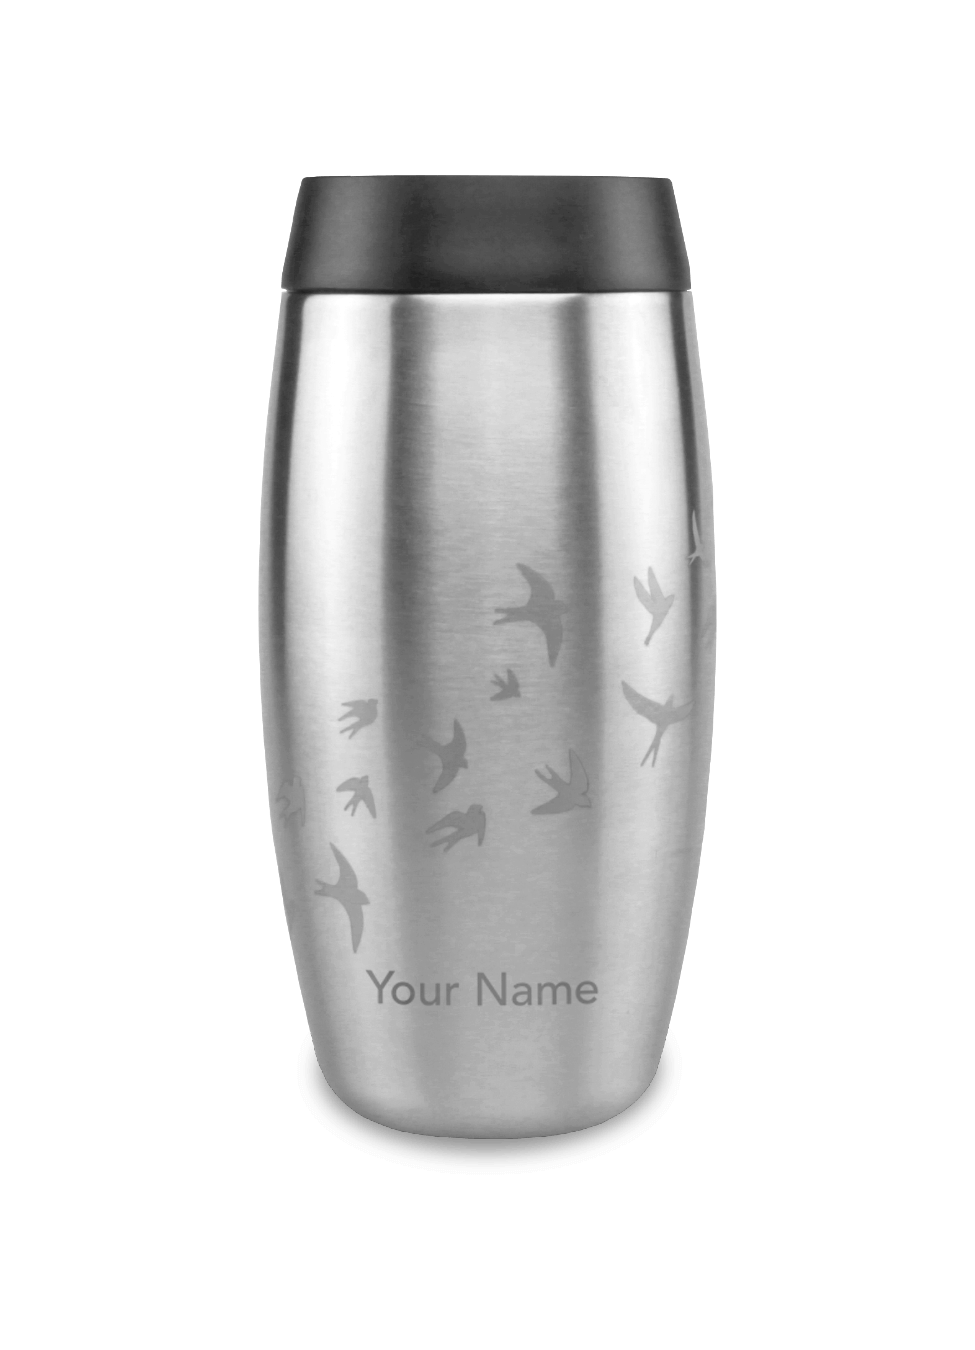 Stainless steel personalised travel mug with bird design 